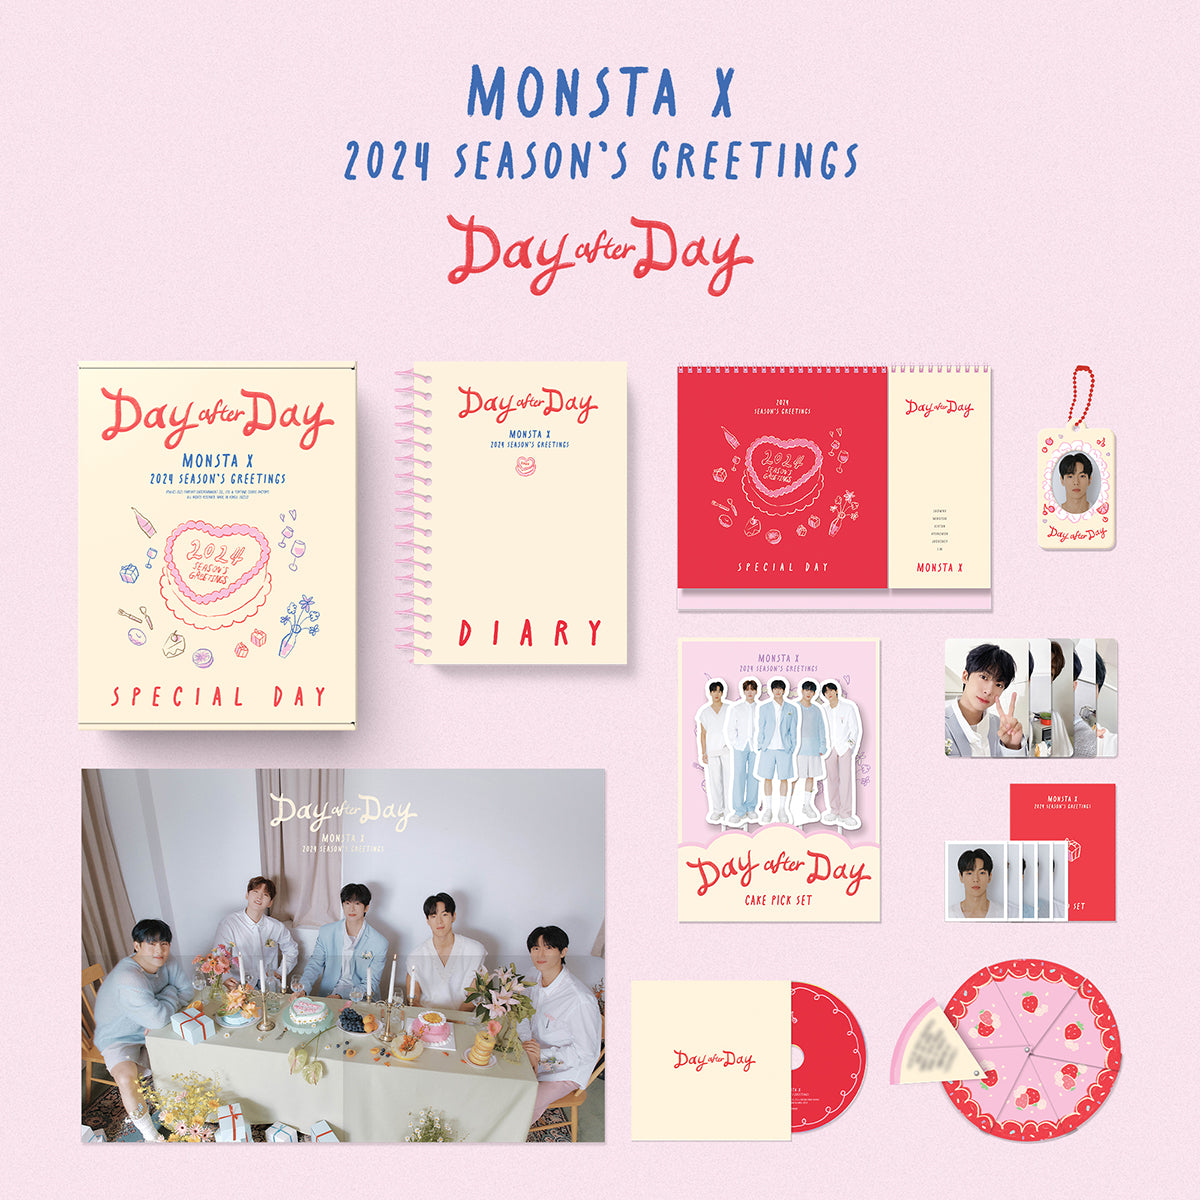 MONSTA X - 2024 SEASON'S GREETINGS [Day after Day] (SPECIAL DAY ver.)